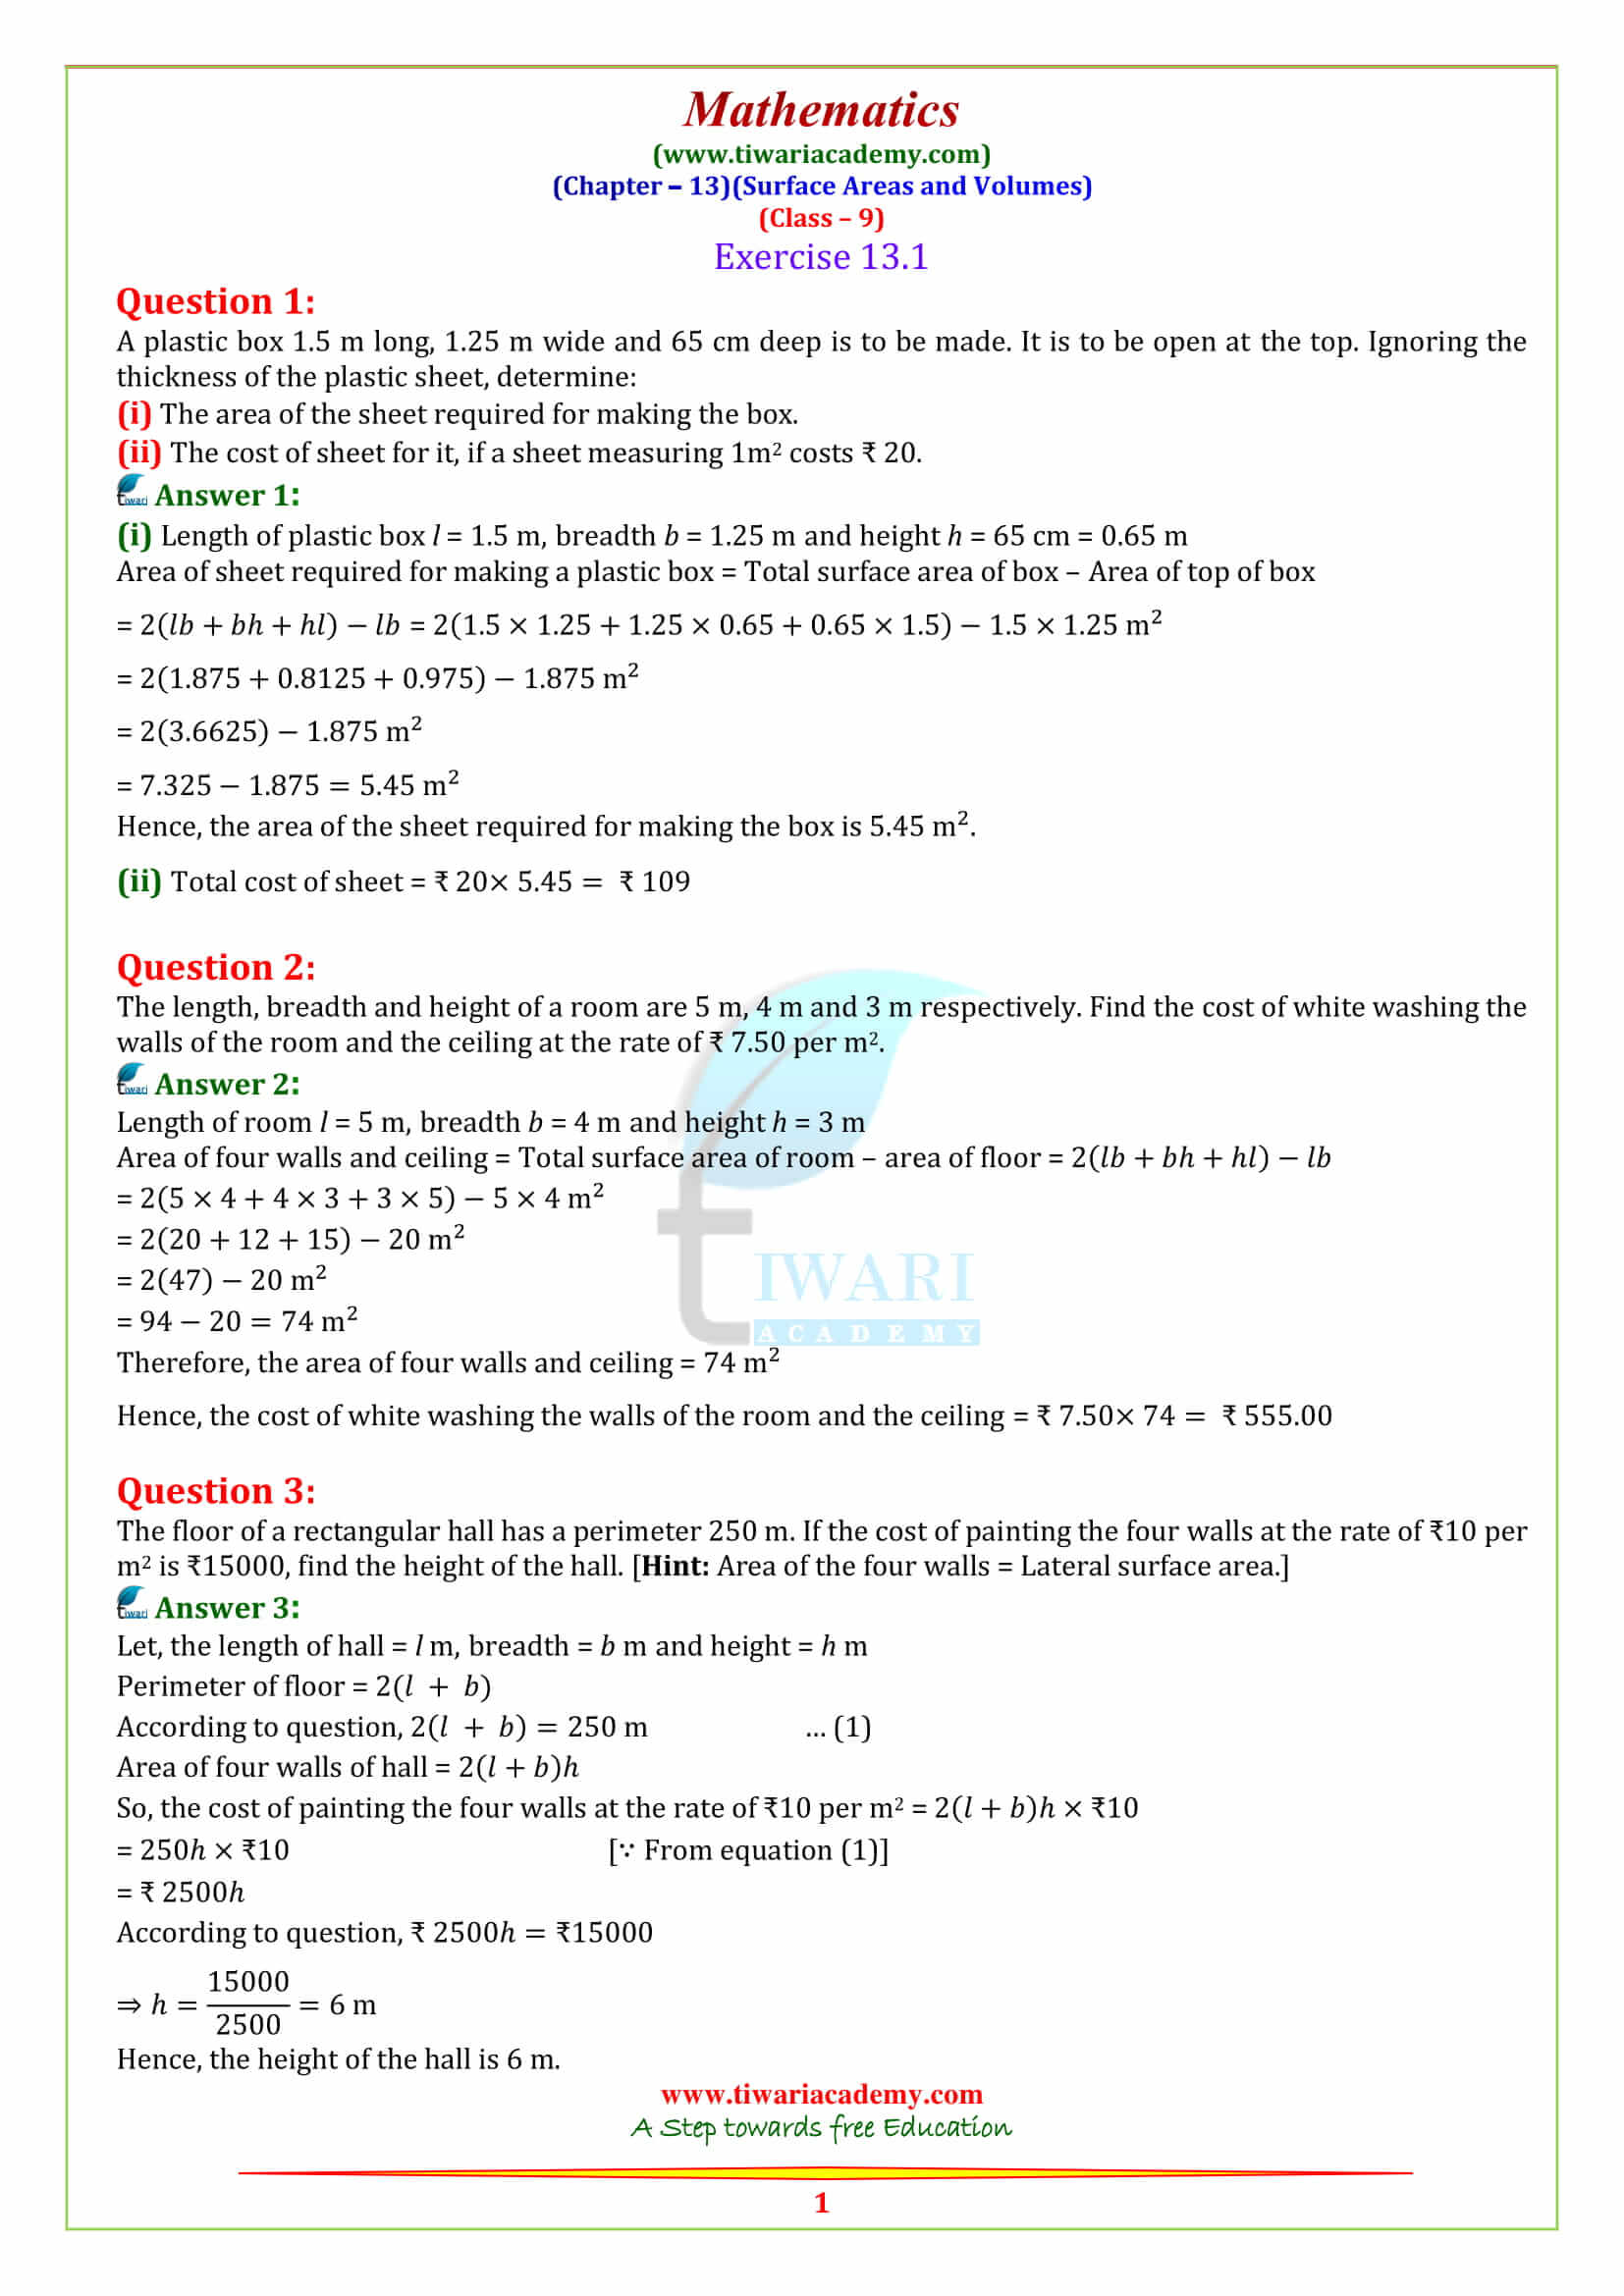 NCERT Solutions for Class 9 Maths Chapter 13 Surface Areas and Volumes Exercise 13.1 in PDF form